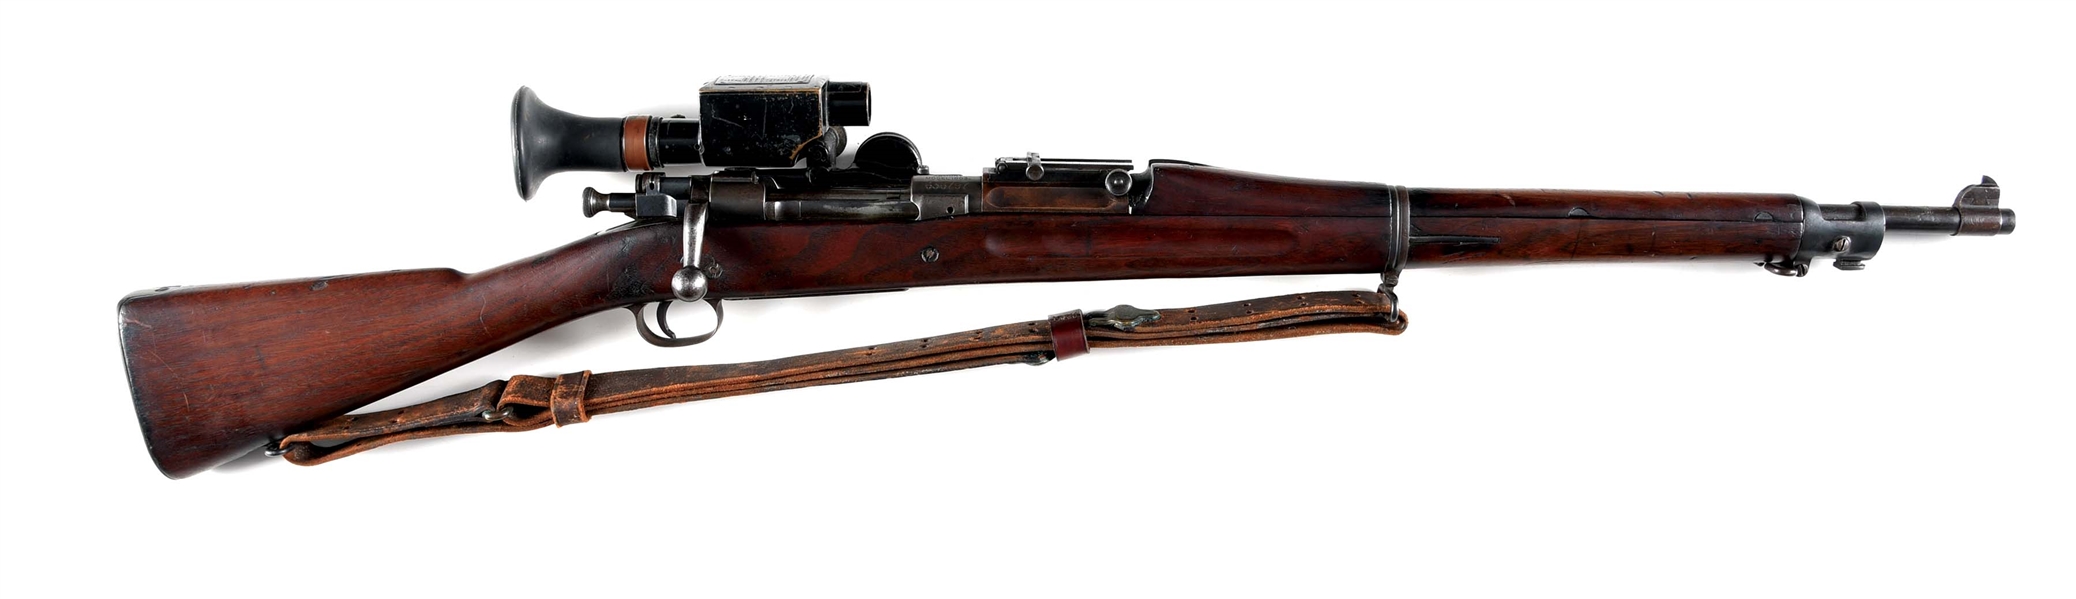 (C) SPRINGFIELD M1903 SNIPER BOLT ACTION RIFLE WITH WARNER-SWASEY SCOPE.